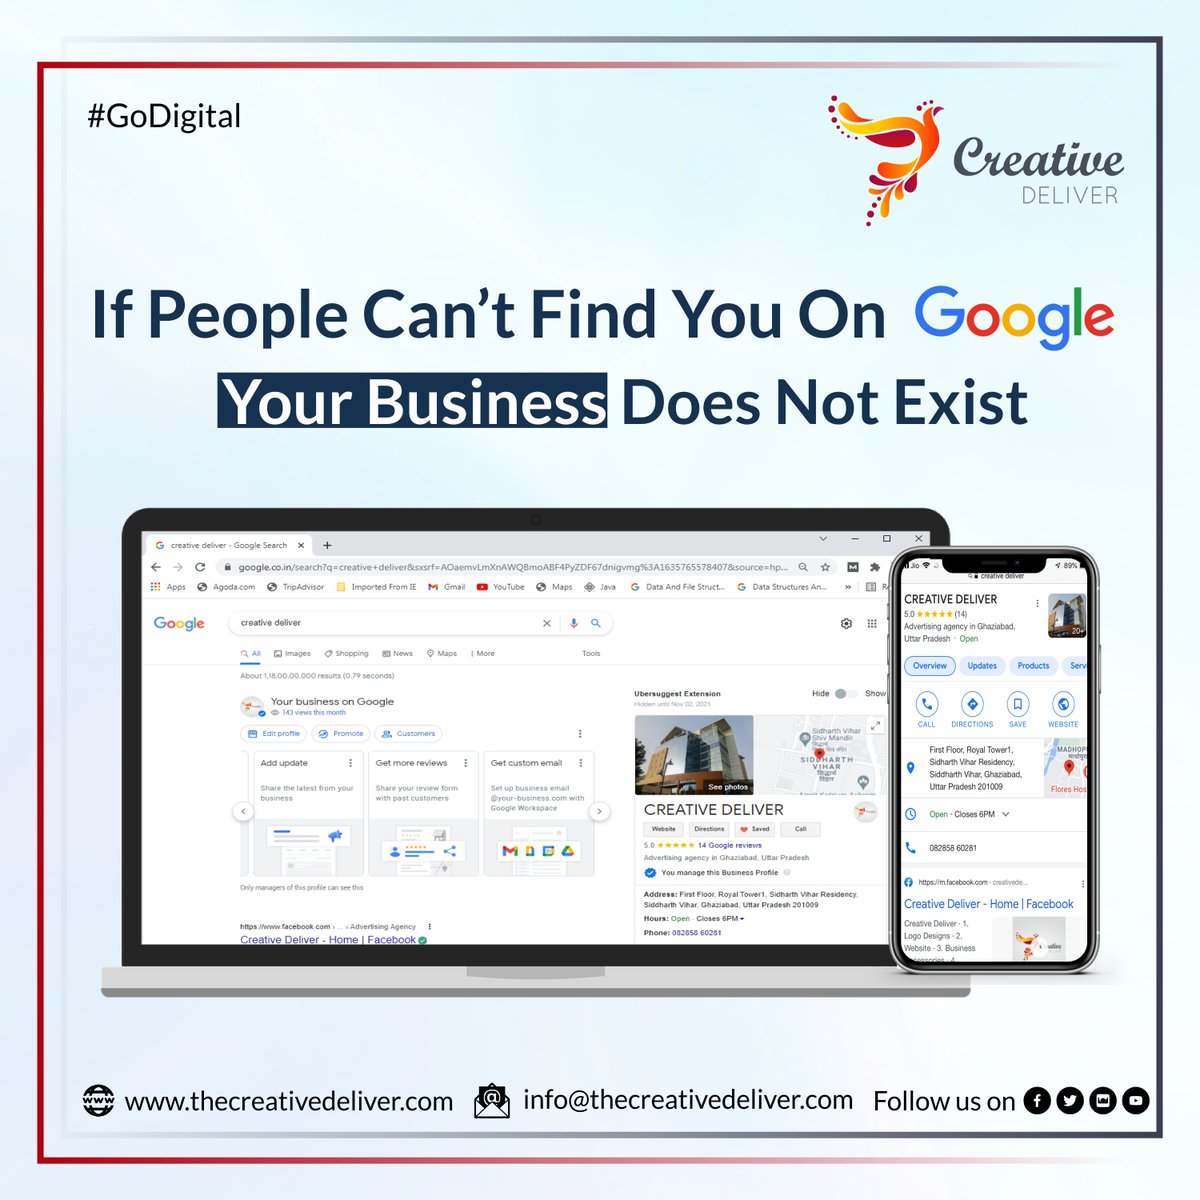 If People Can’t Find You On Google, Your Business Does Not Exist...
We will help register your business on google. 
Email: Creativedeliver@gmail.com
Website: creativedeliver.com
#googlemybusiness #google #mybusiness #businessongoogle #CreativeDeliver #GoDigital